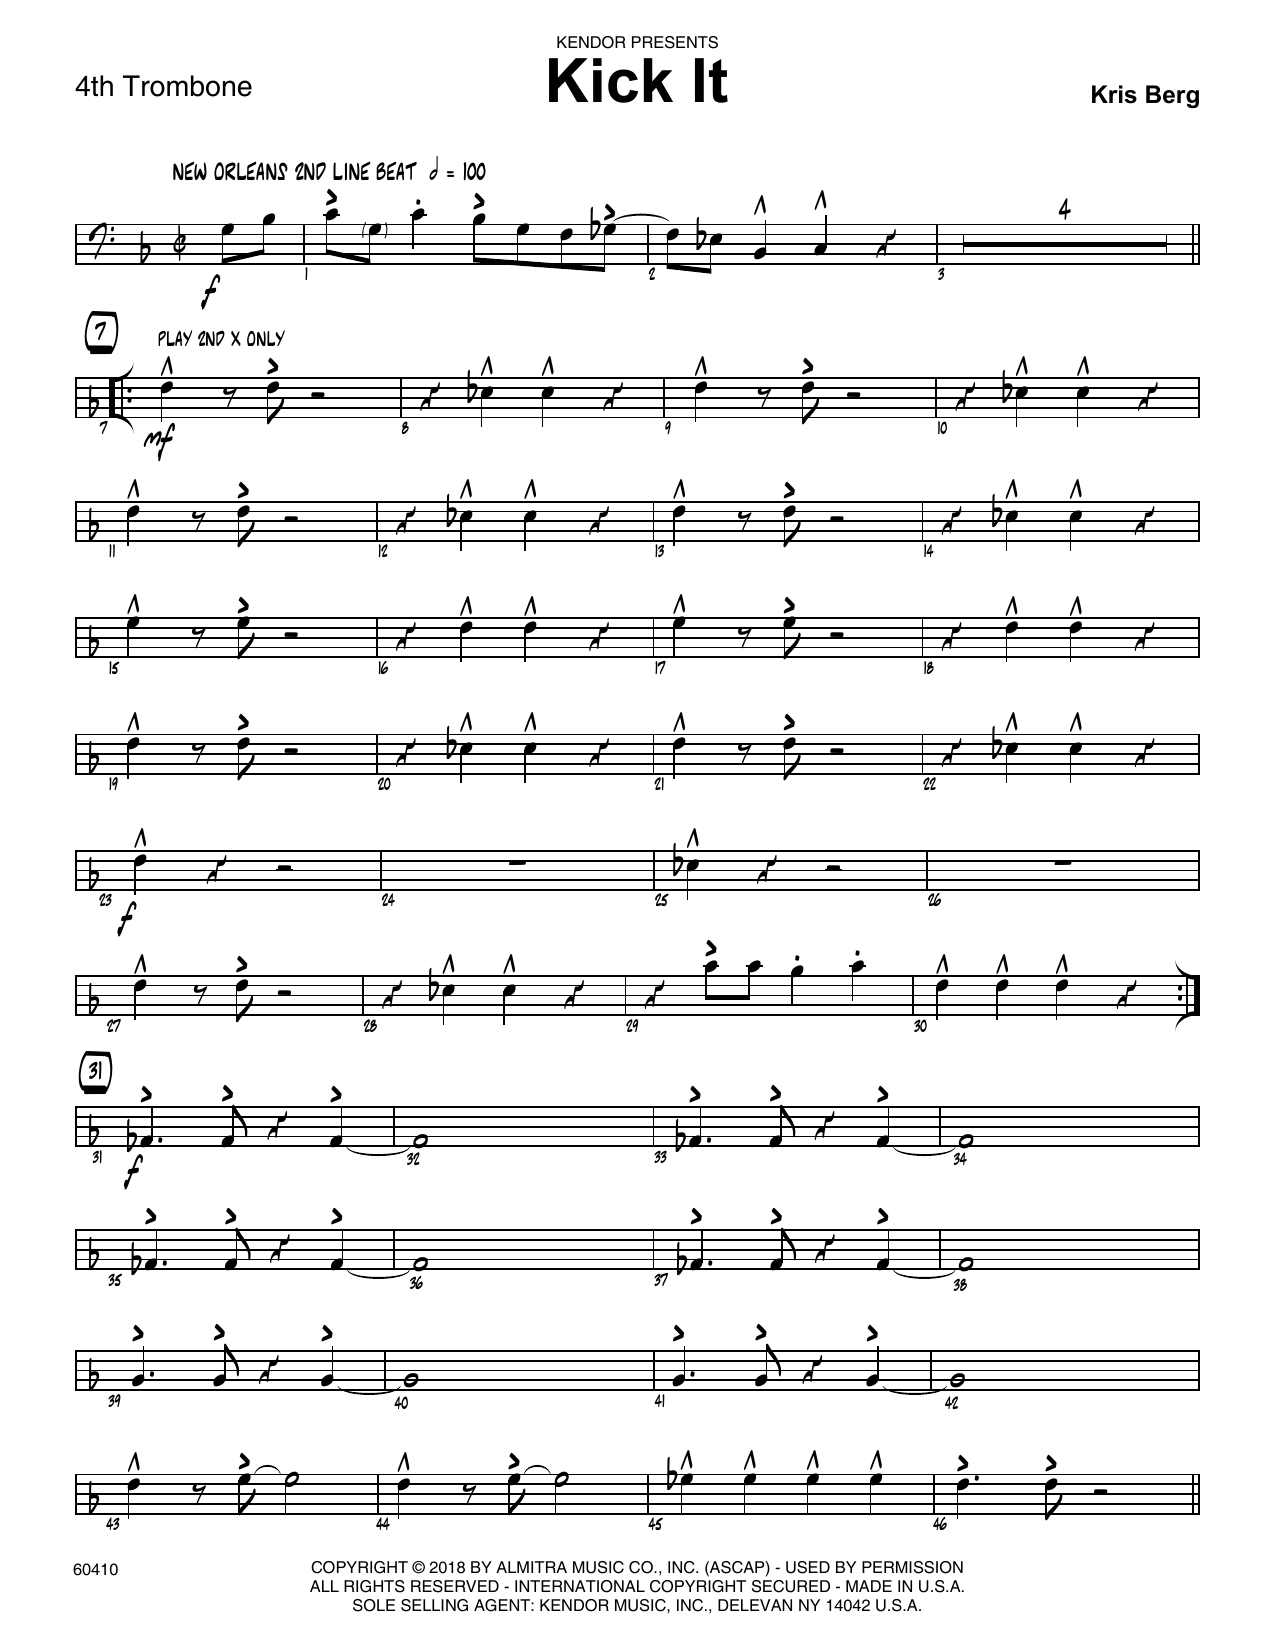 Kris Berg Kick It - 4th Trombone sheet music preview music notes and score for Jazz Ensemble including 4 page(s)